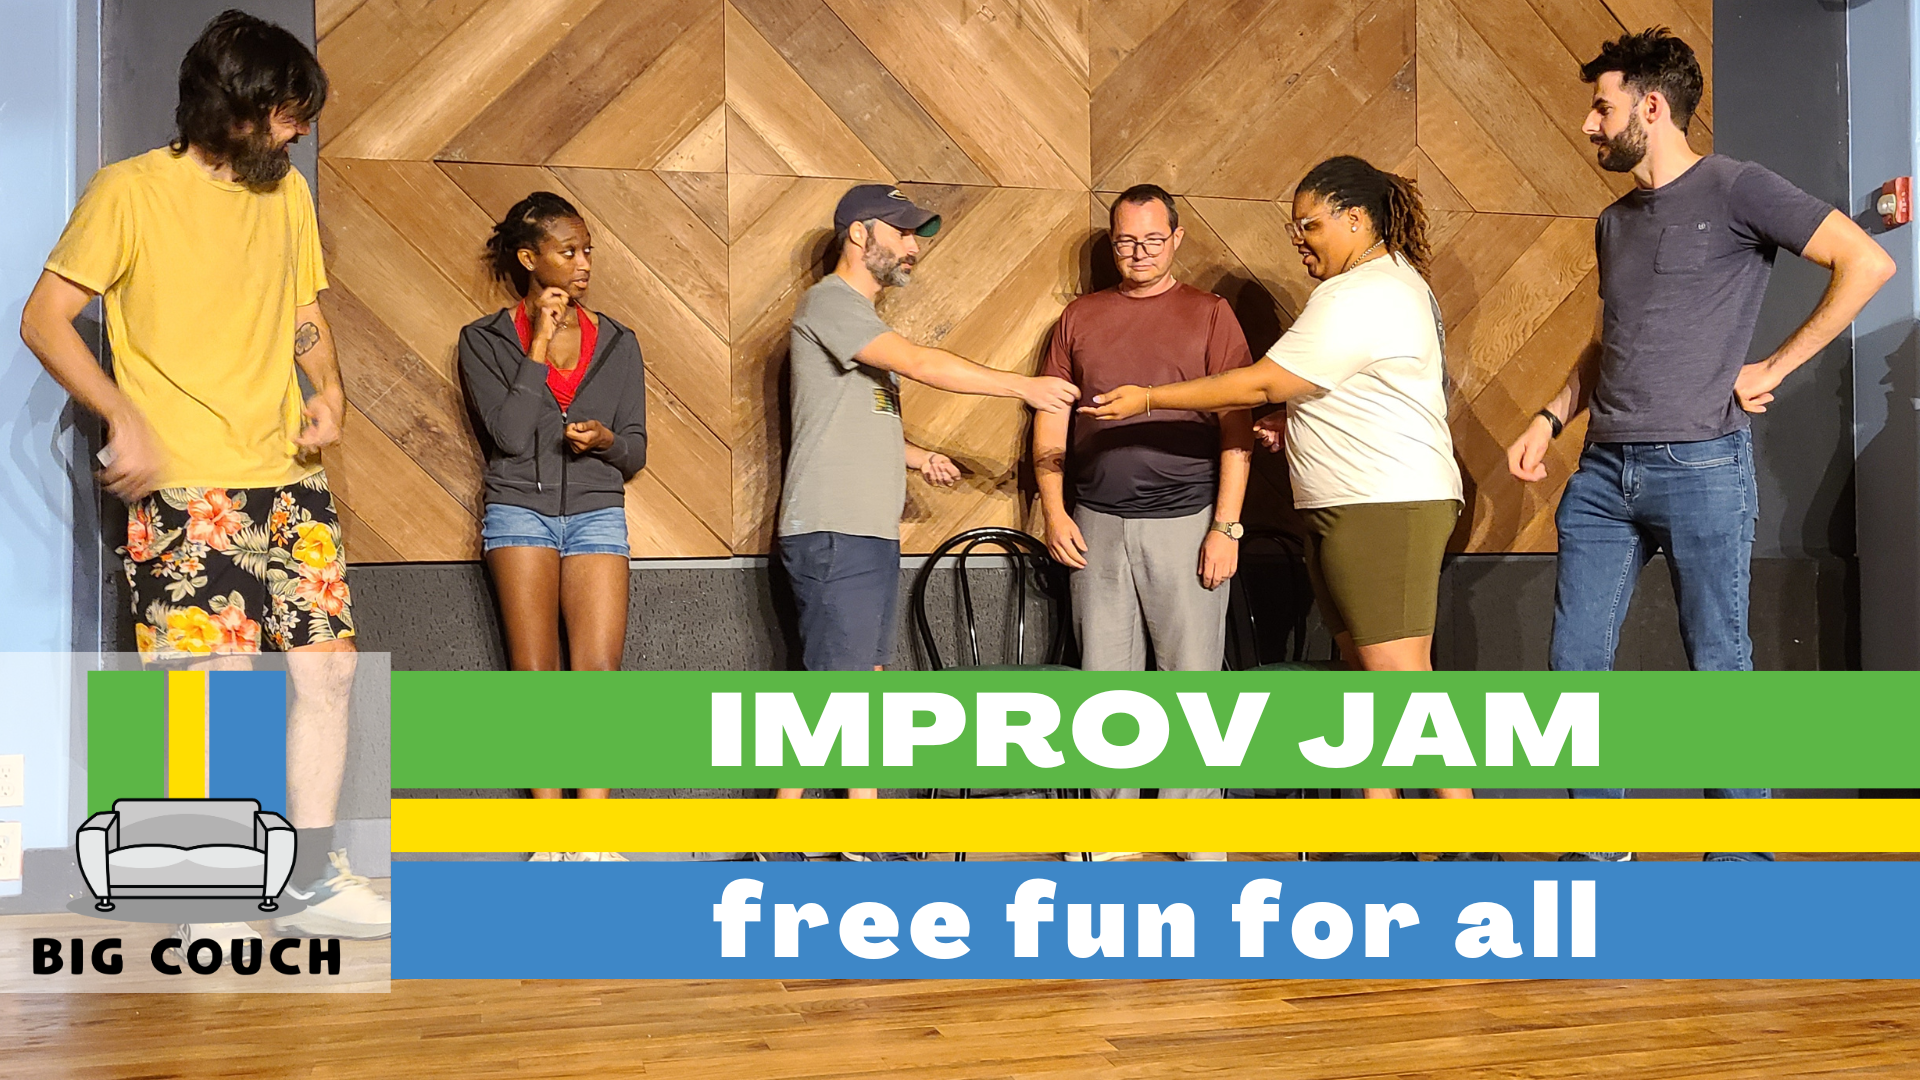 A diverse group of people participate in an improv jam on a stage.